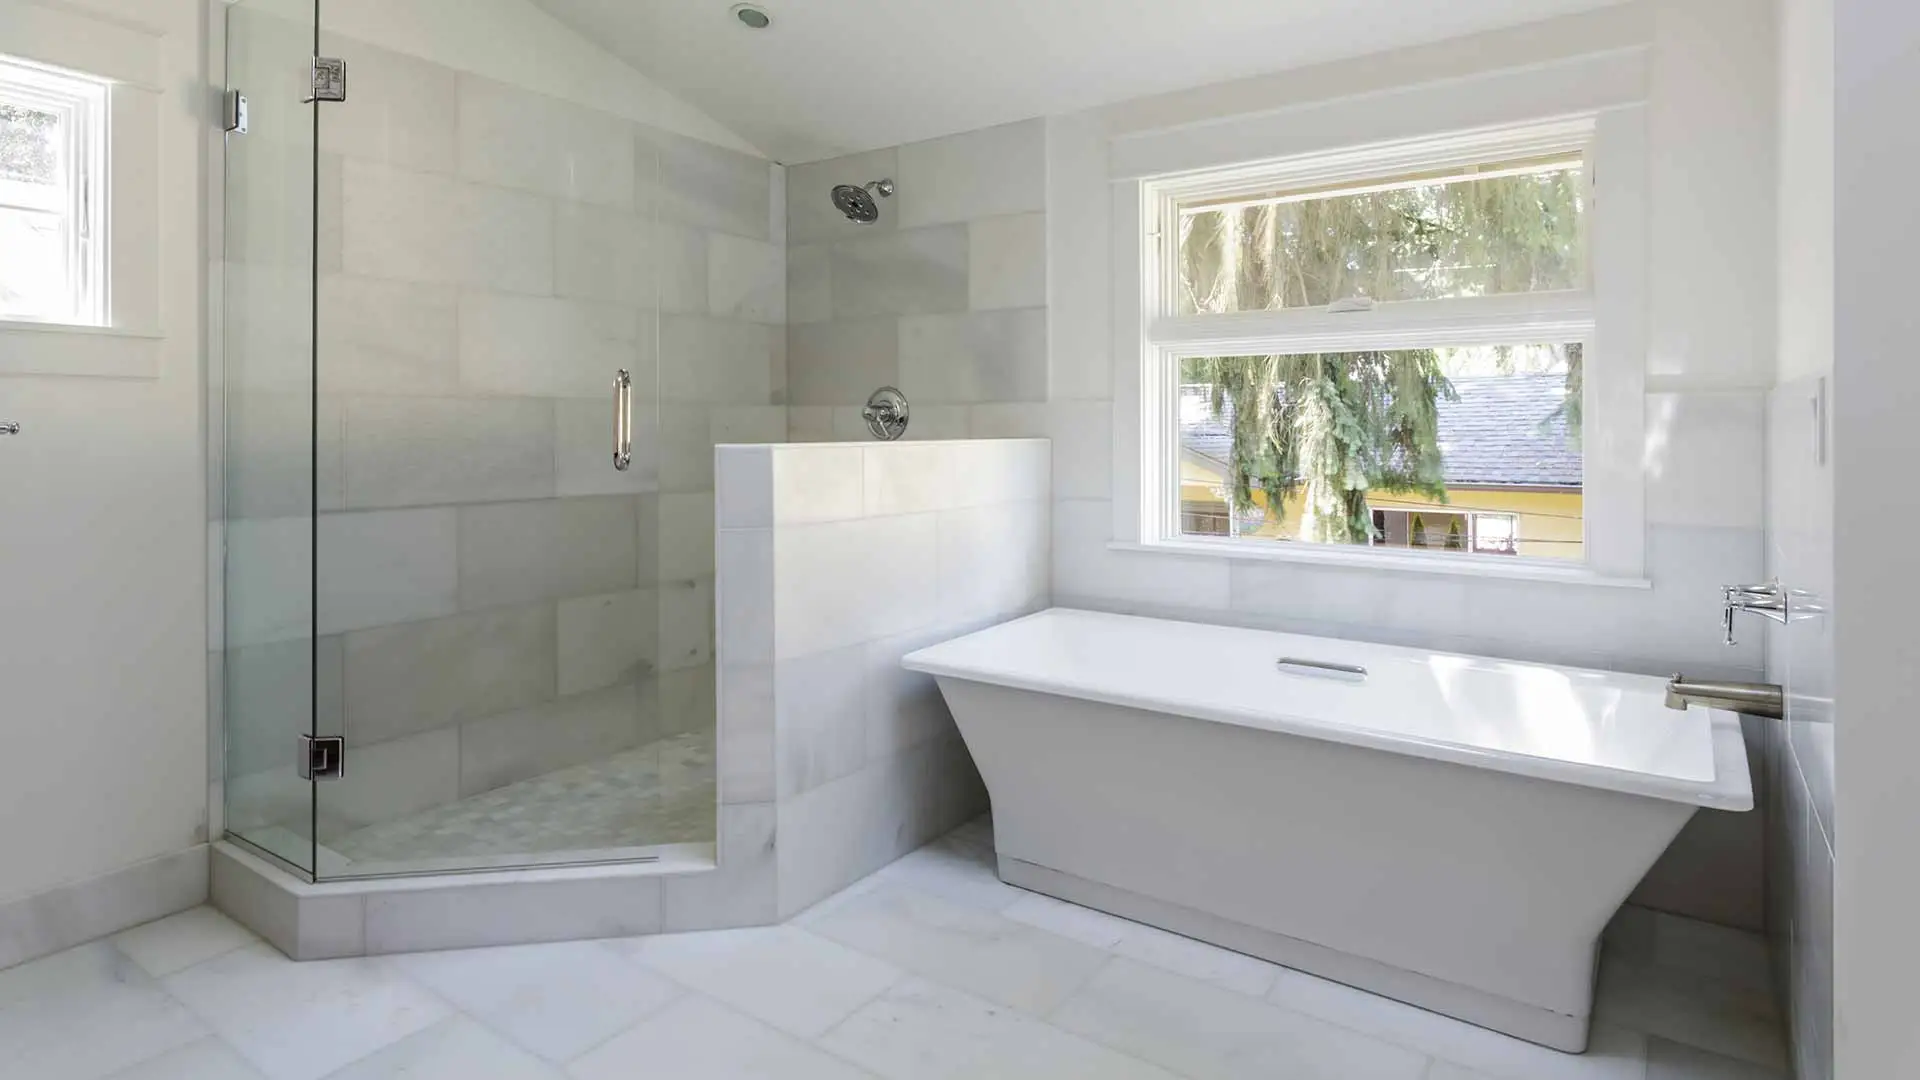 Bathtub & Shower Choices Available When Remodeling Your Bathroom